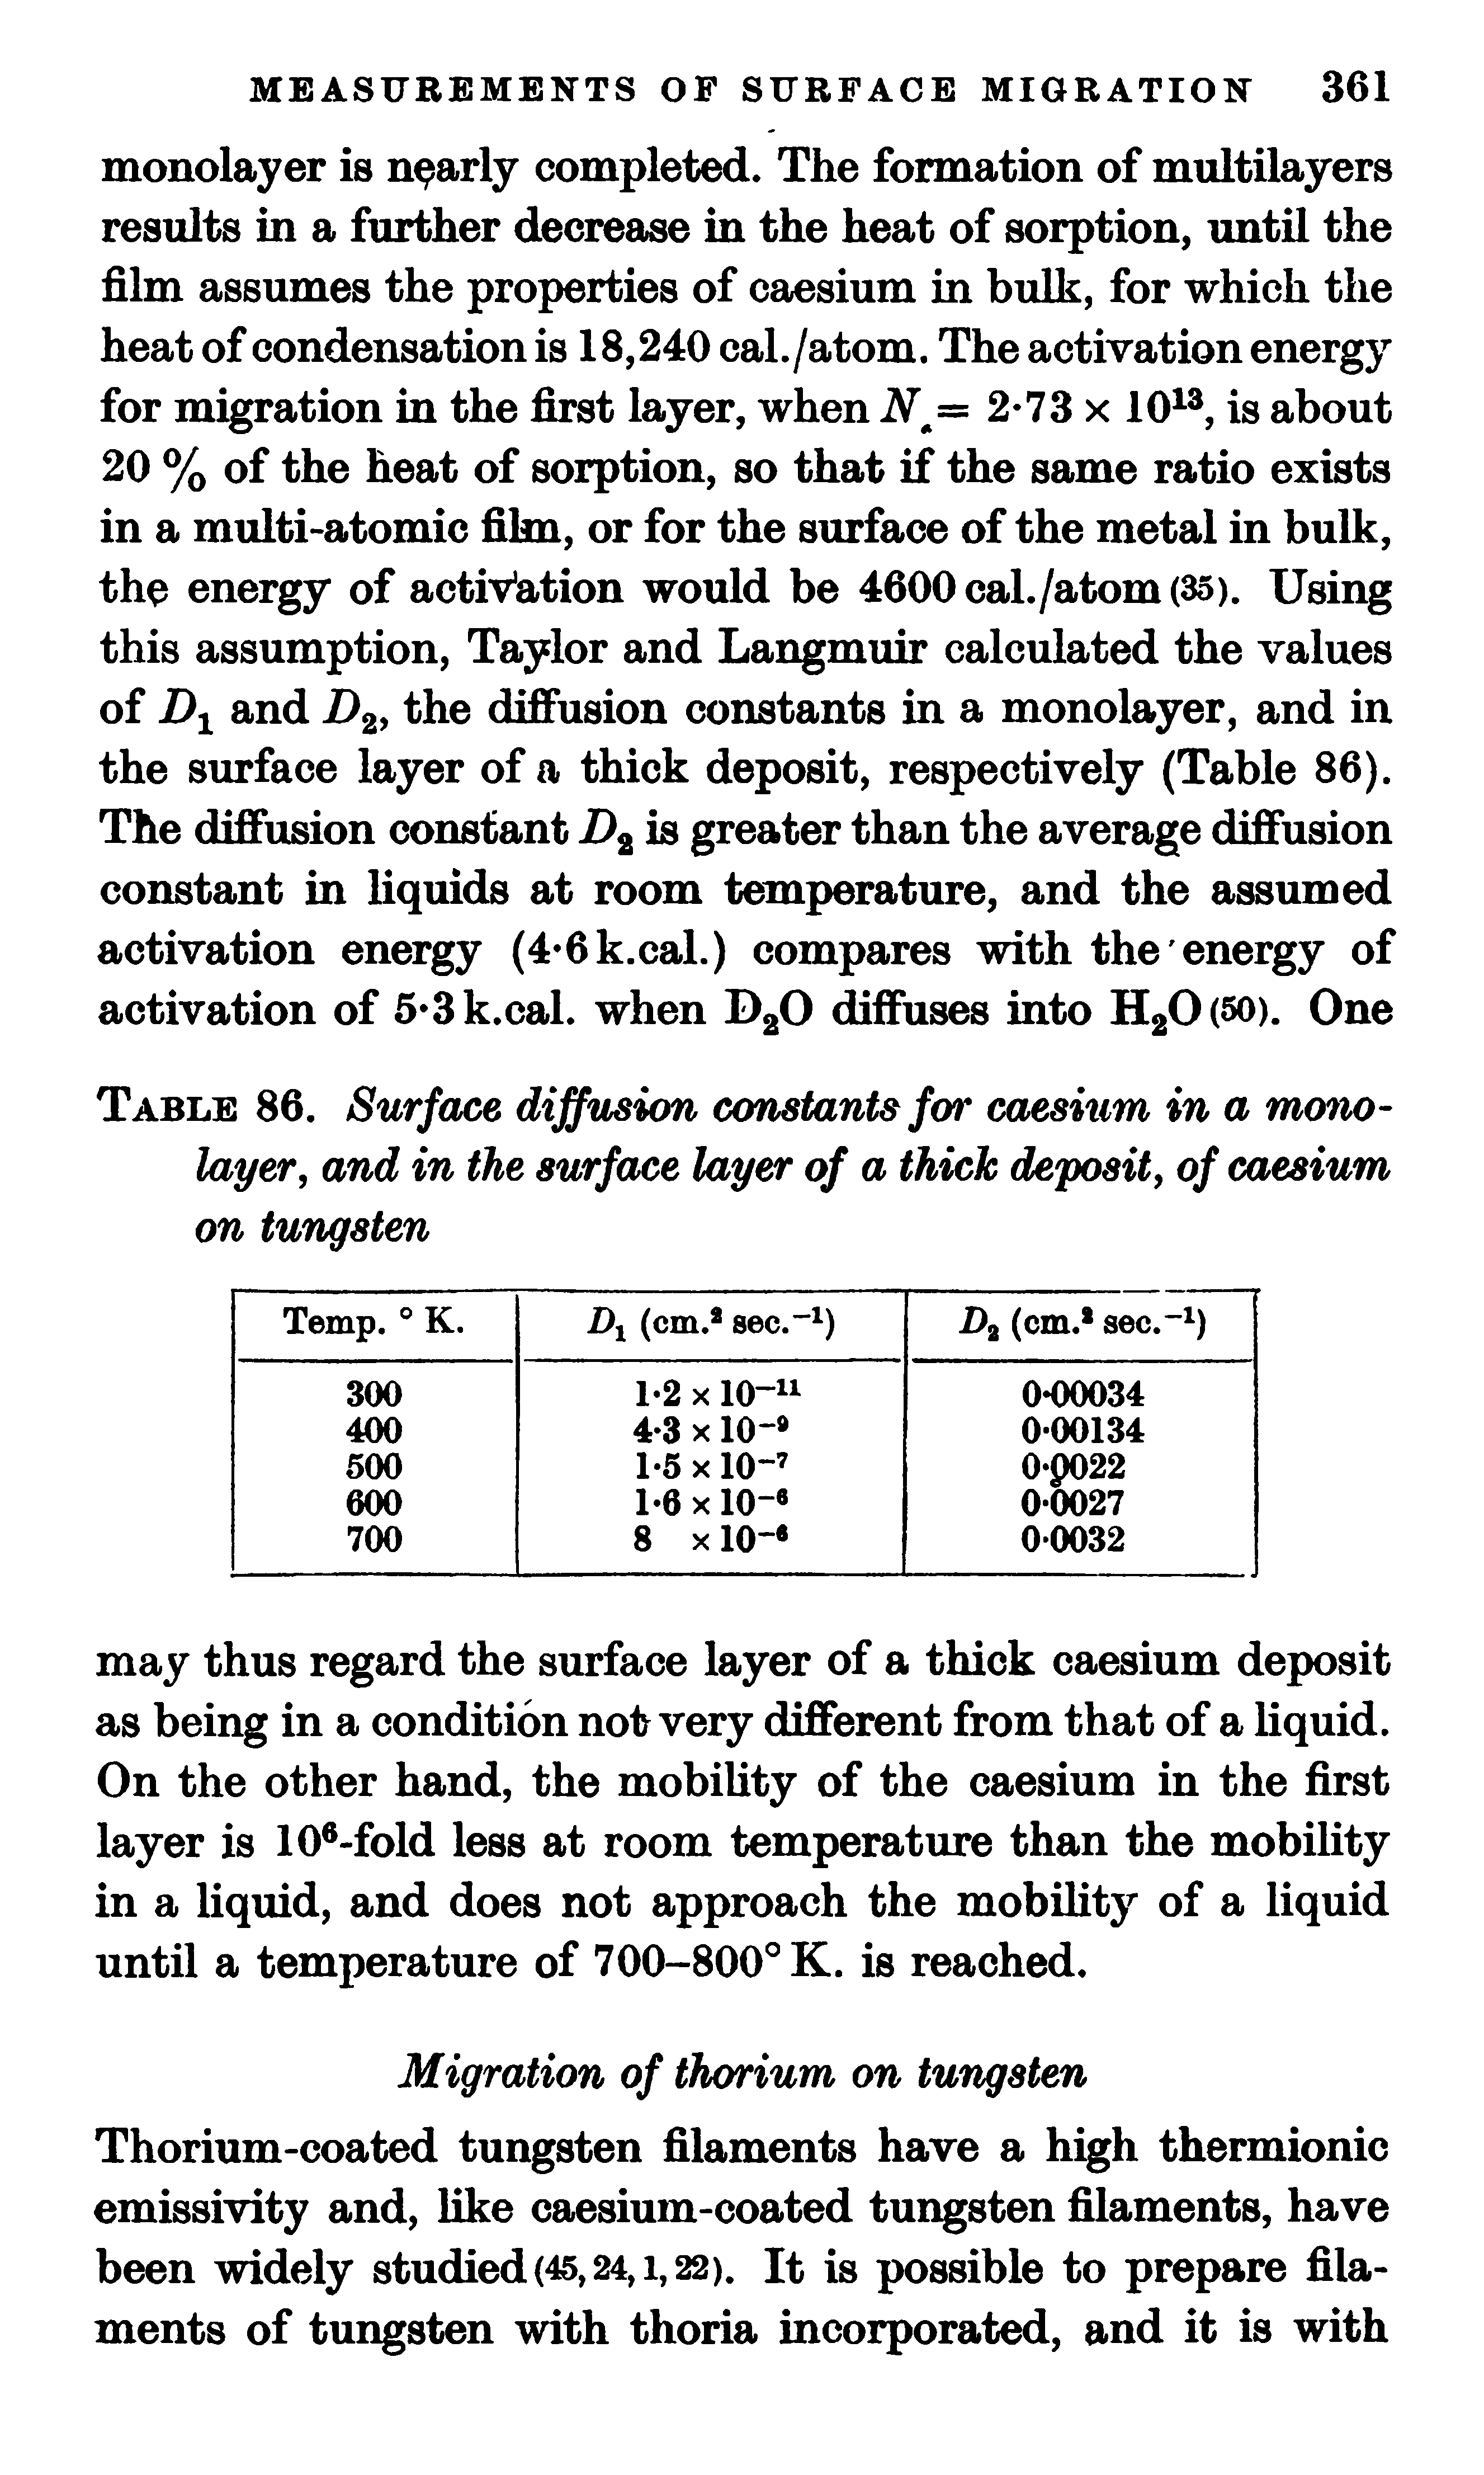 Table 86. Surface diffusion constants for caesmm in a memo-layer and in the surface layer of a thick deposity of caesium on tungsten...